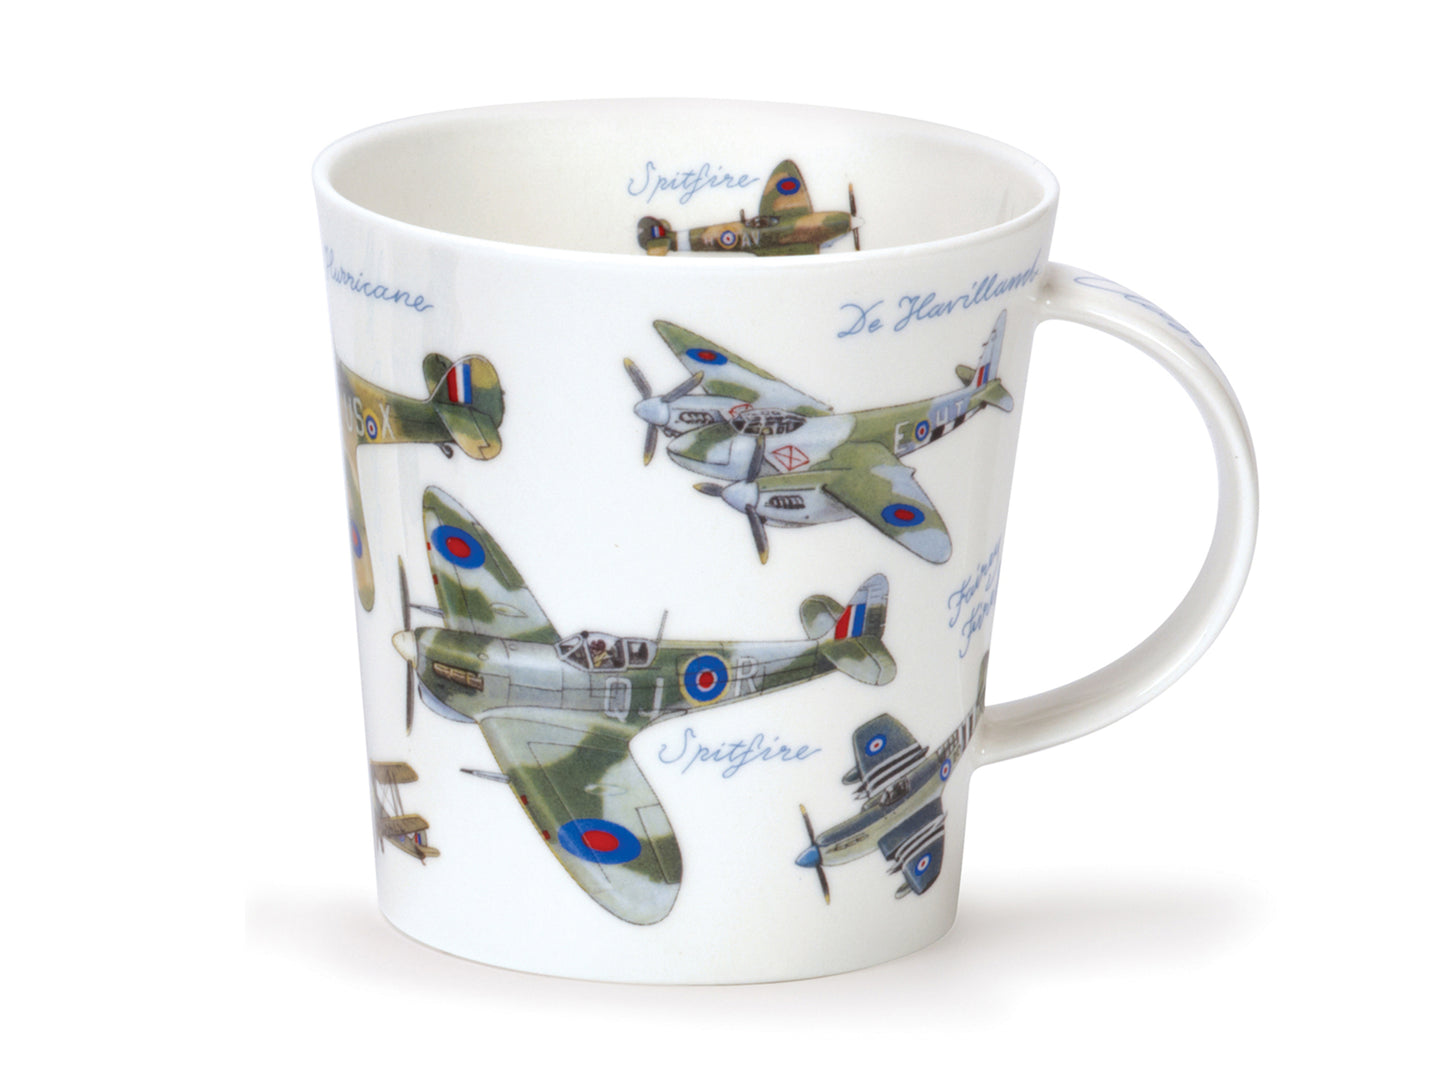 This Dunoon Cairngorm Classic Collection Planes mug is made of a fine bone china and depicts different types of airplanes around its exterior, along with their appropriate labels. There are also two planes printed opposite each other around the inner rim of the mug.